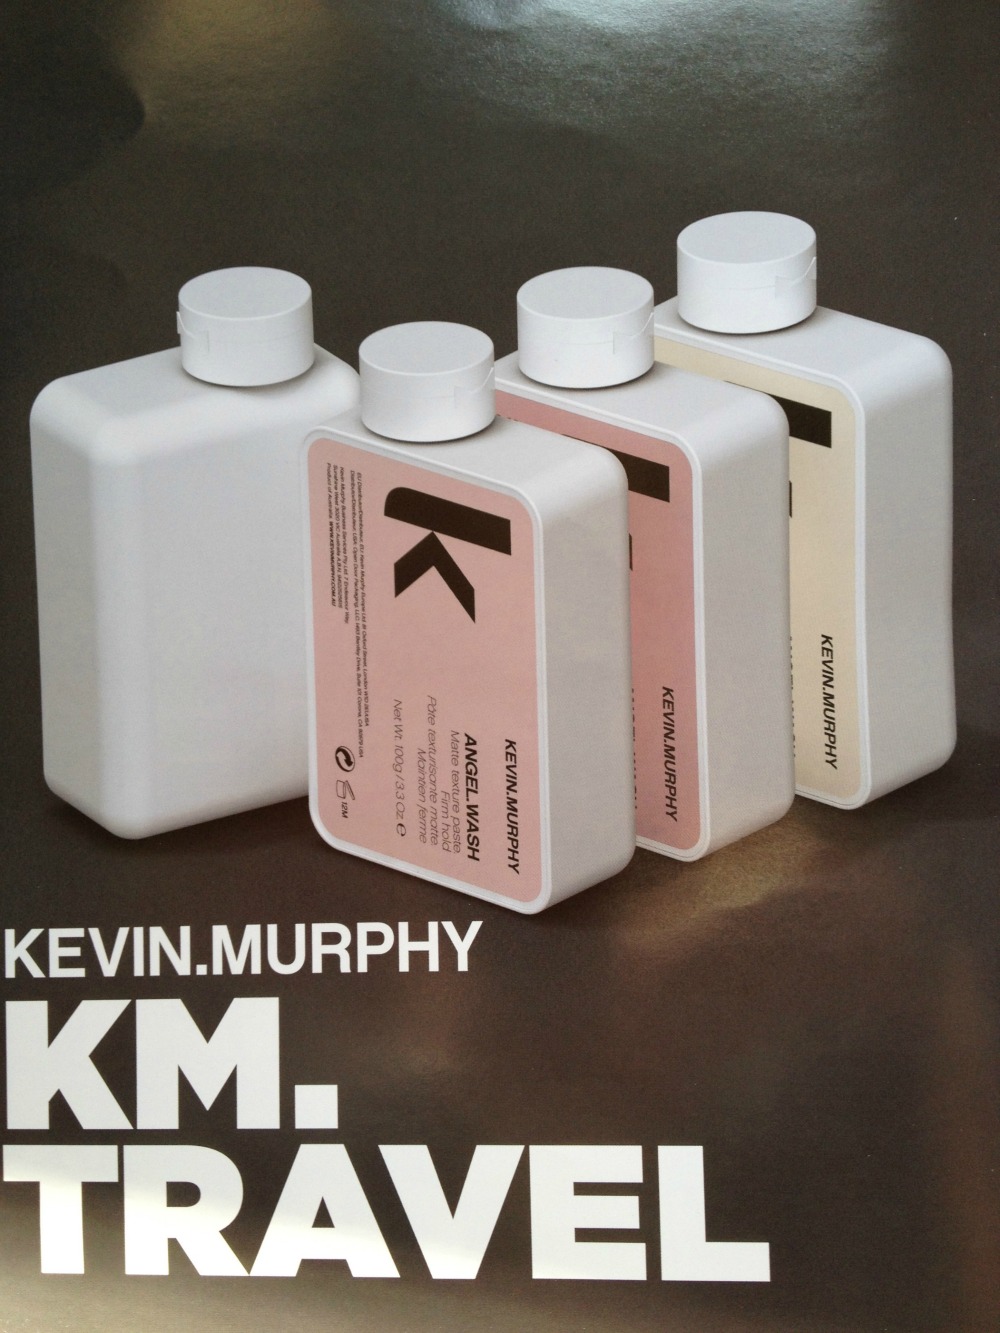 KEVIN.MURPHY Holiday Collection — A Little Hair Help